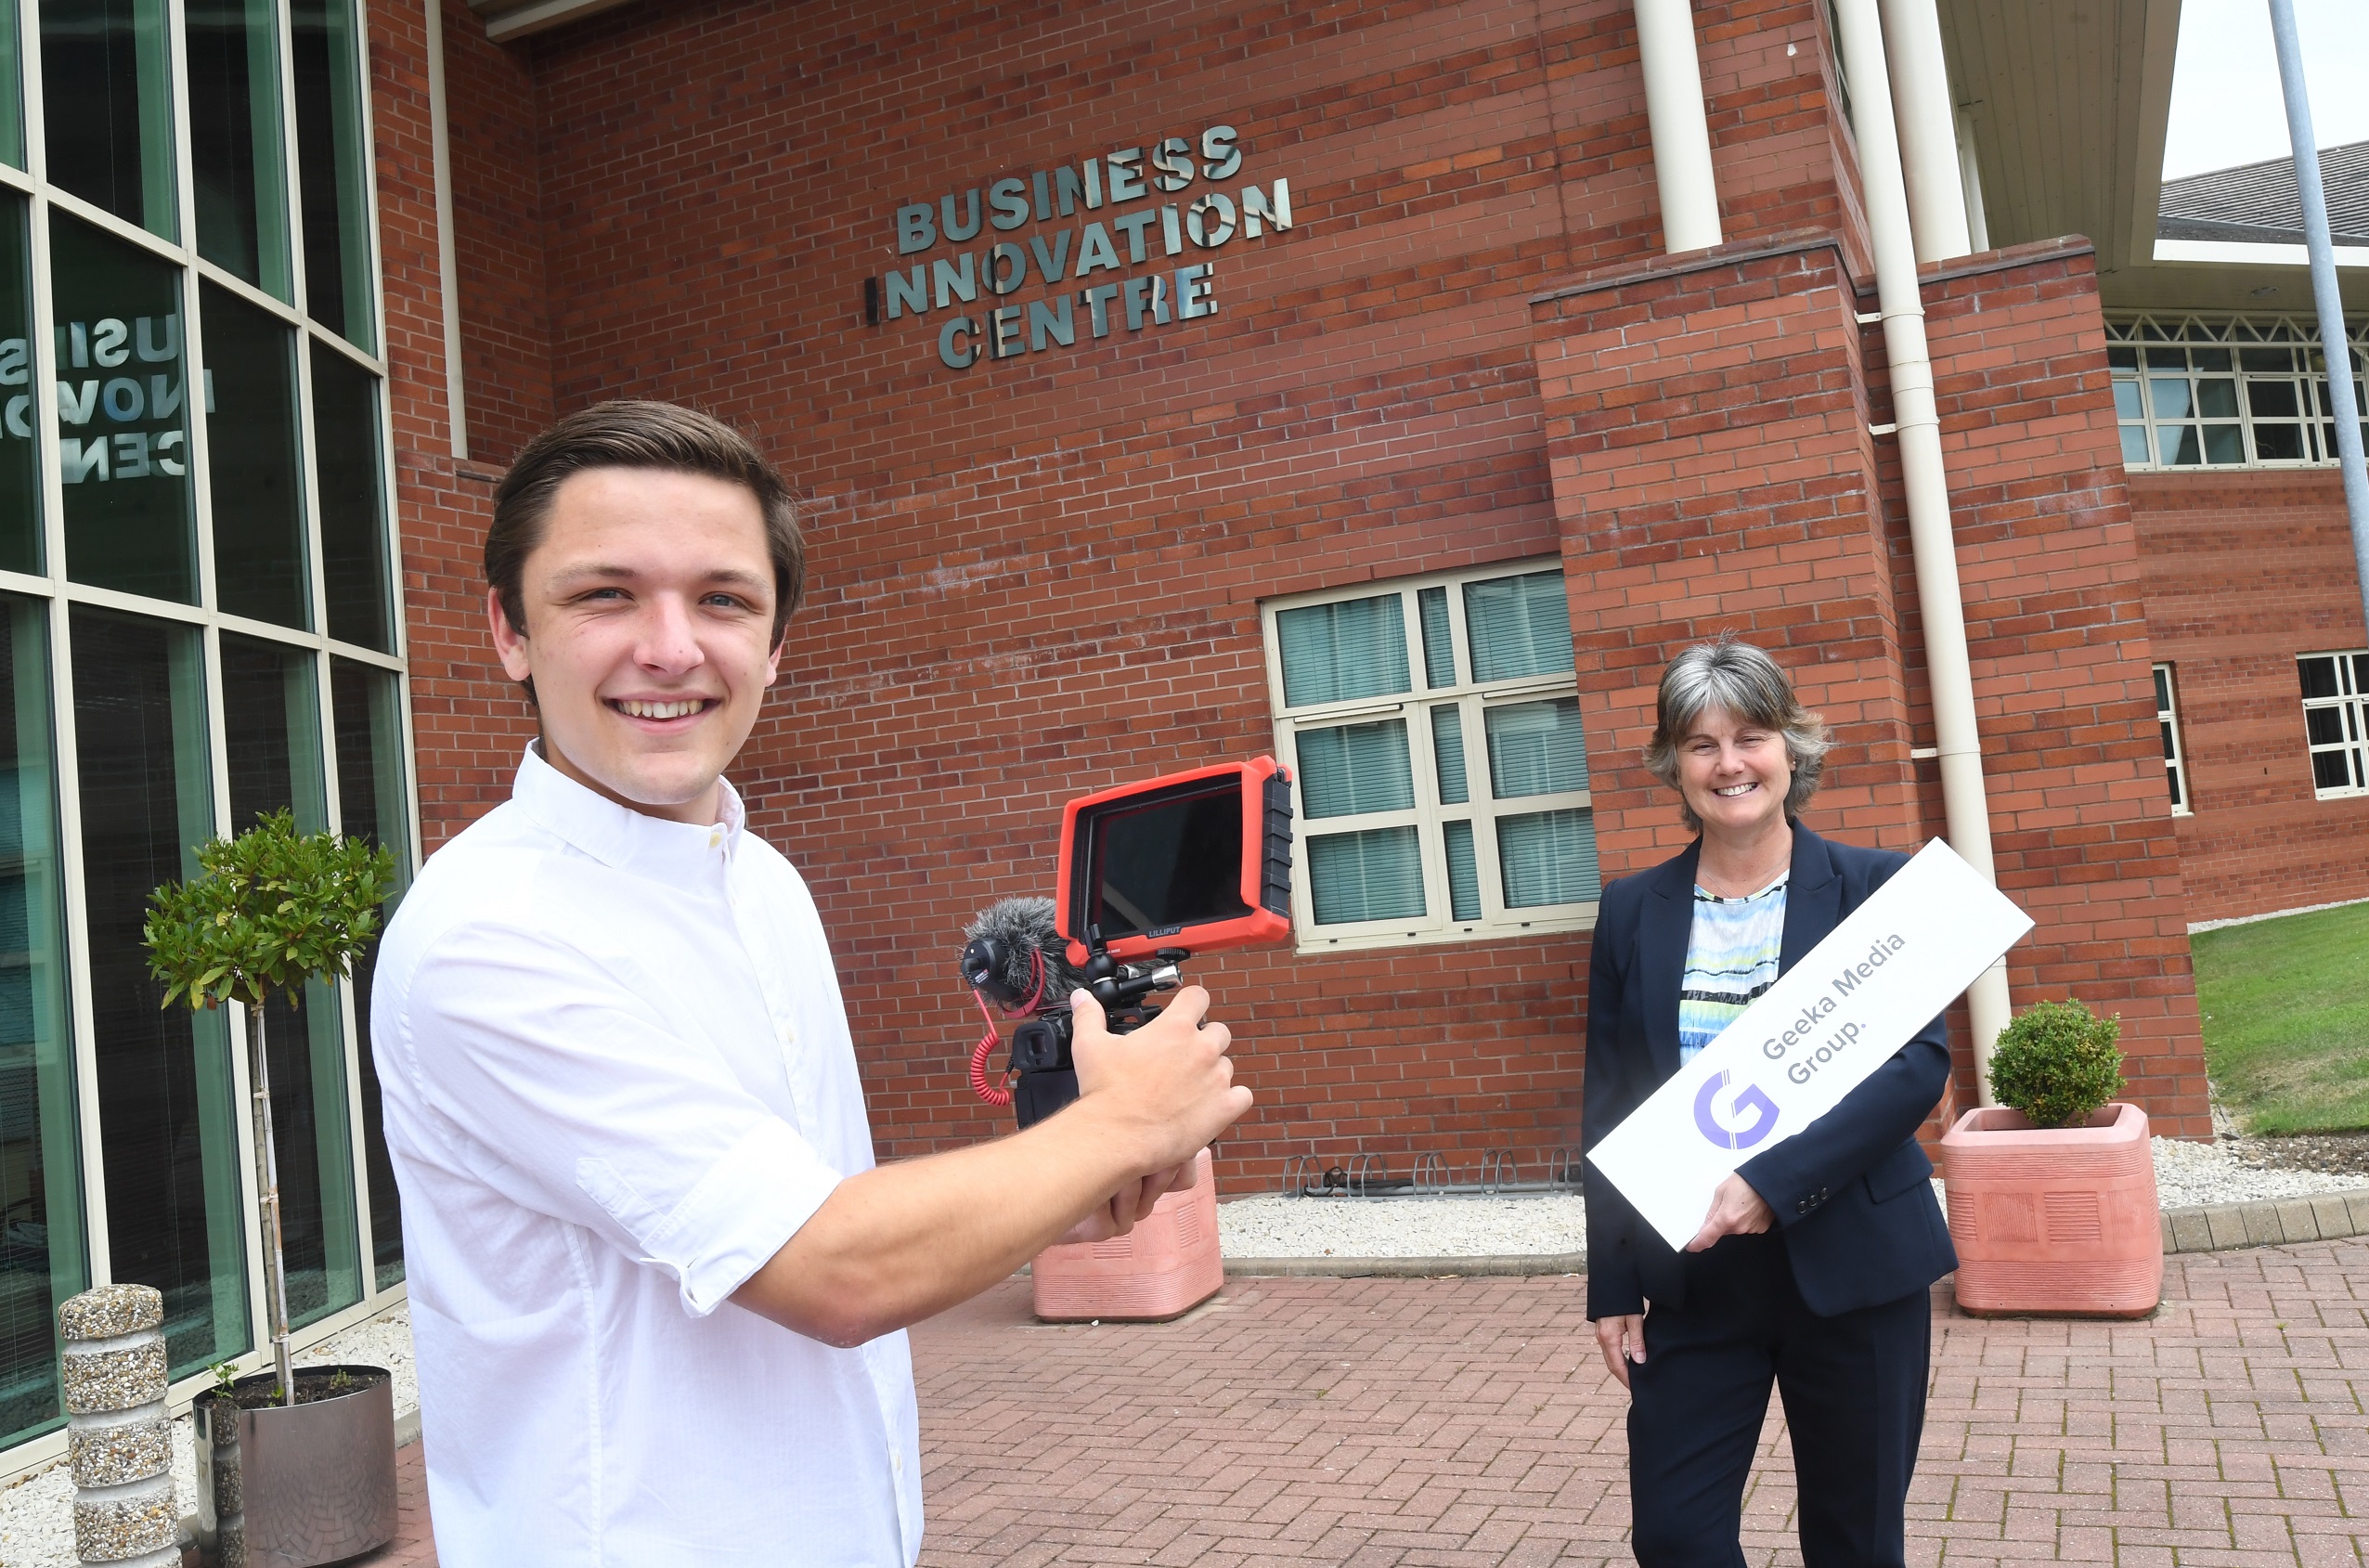 Teenage entrepreneur from Coventry sets up office in the city